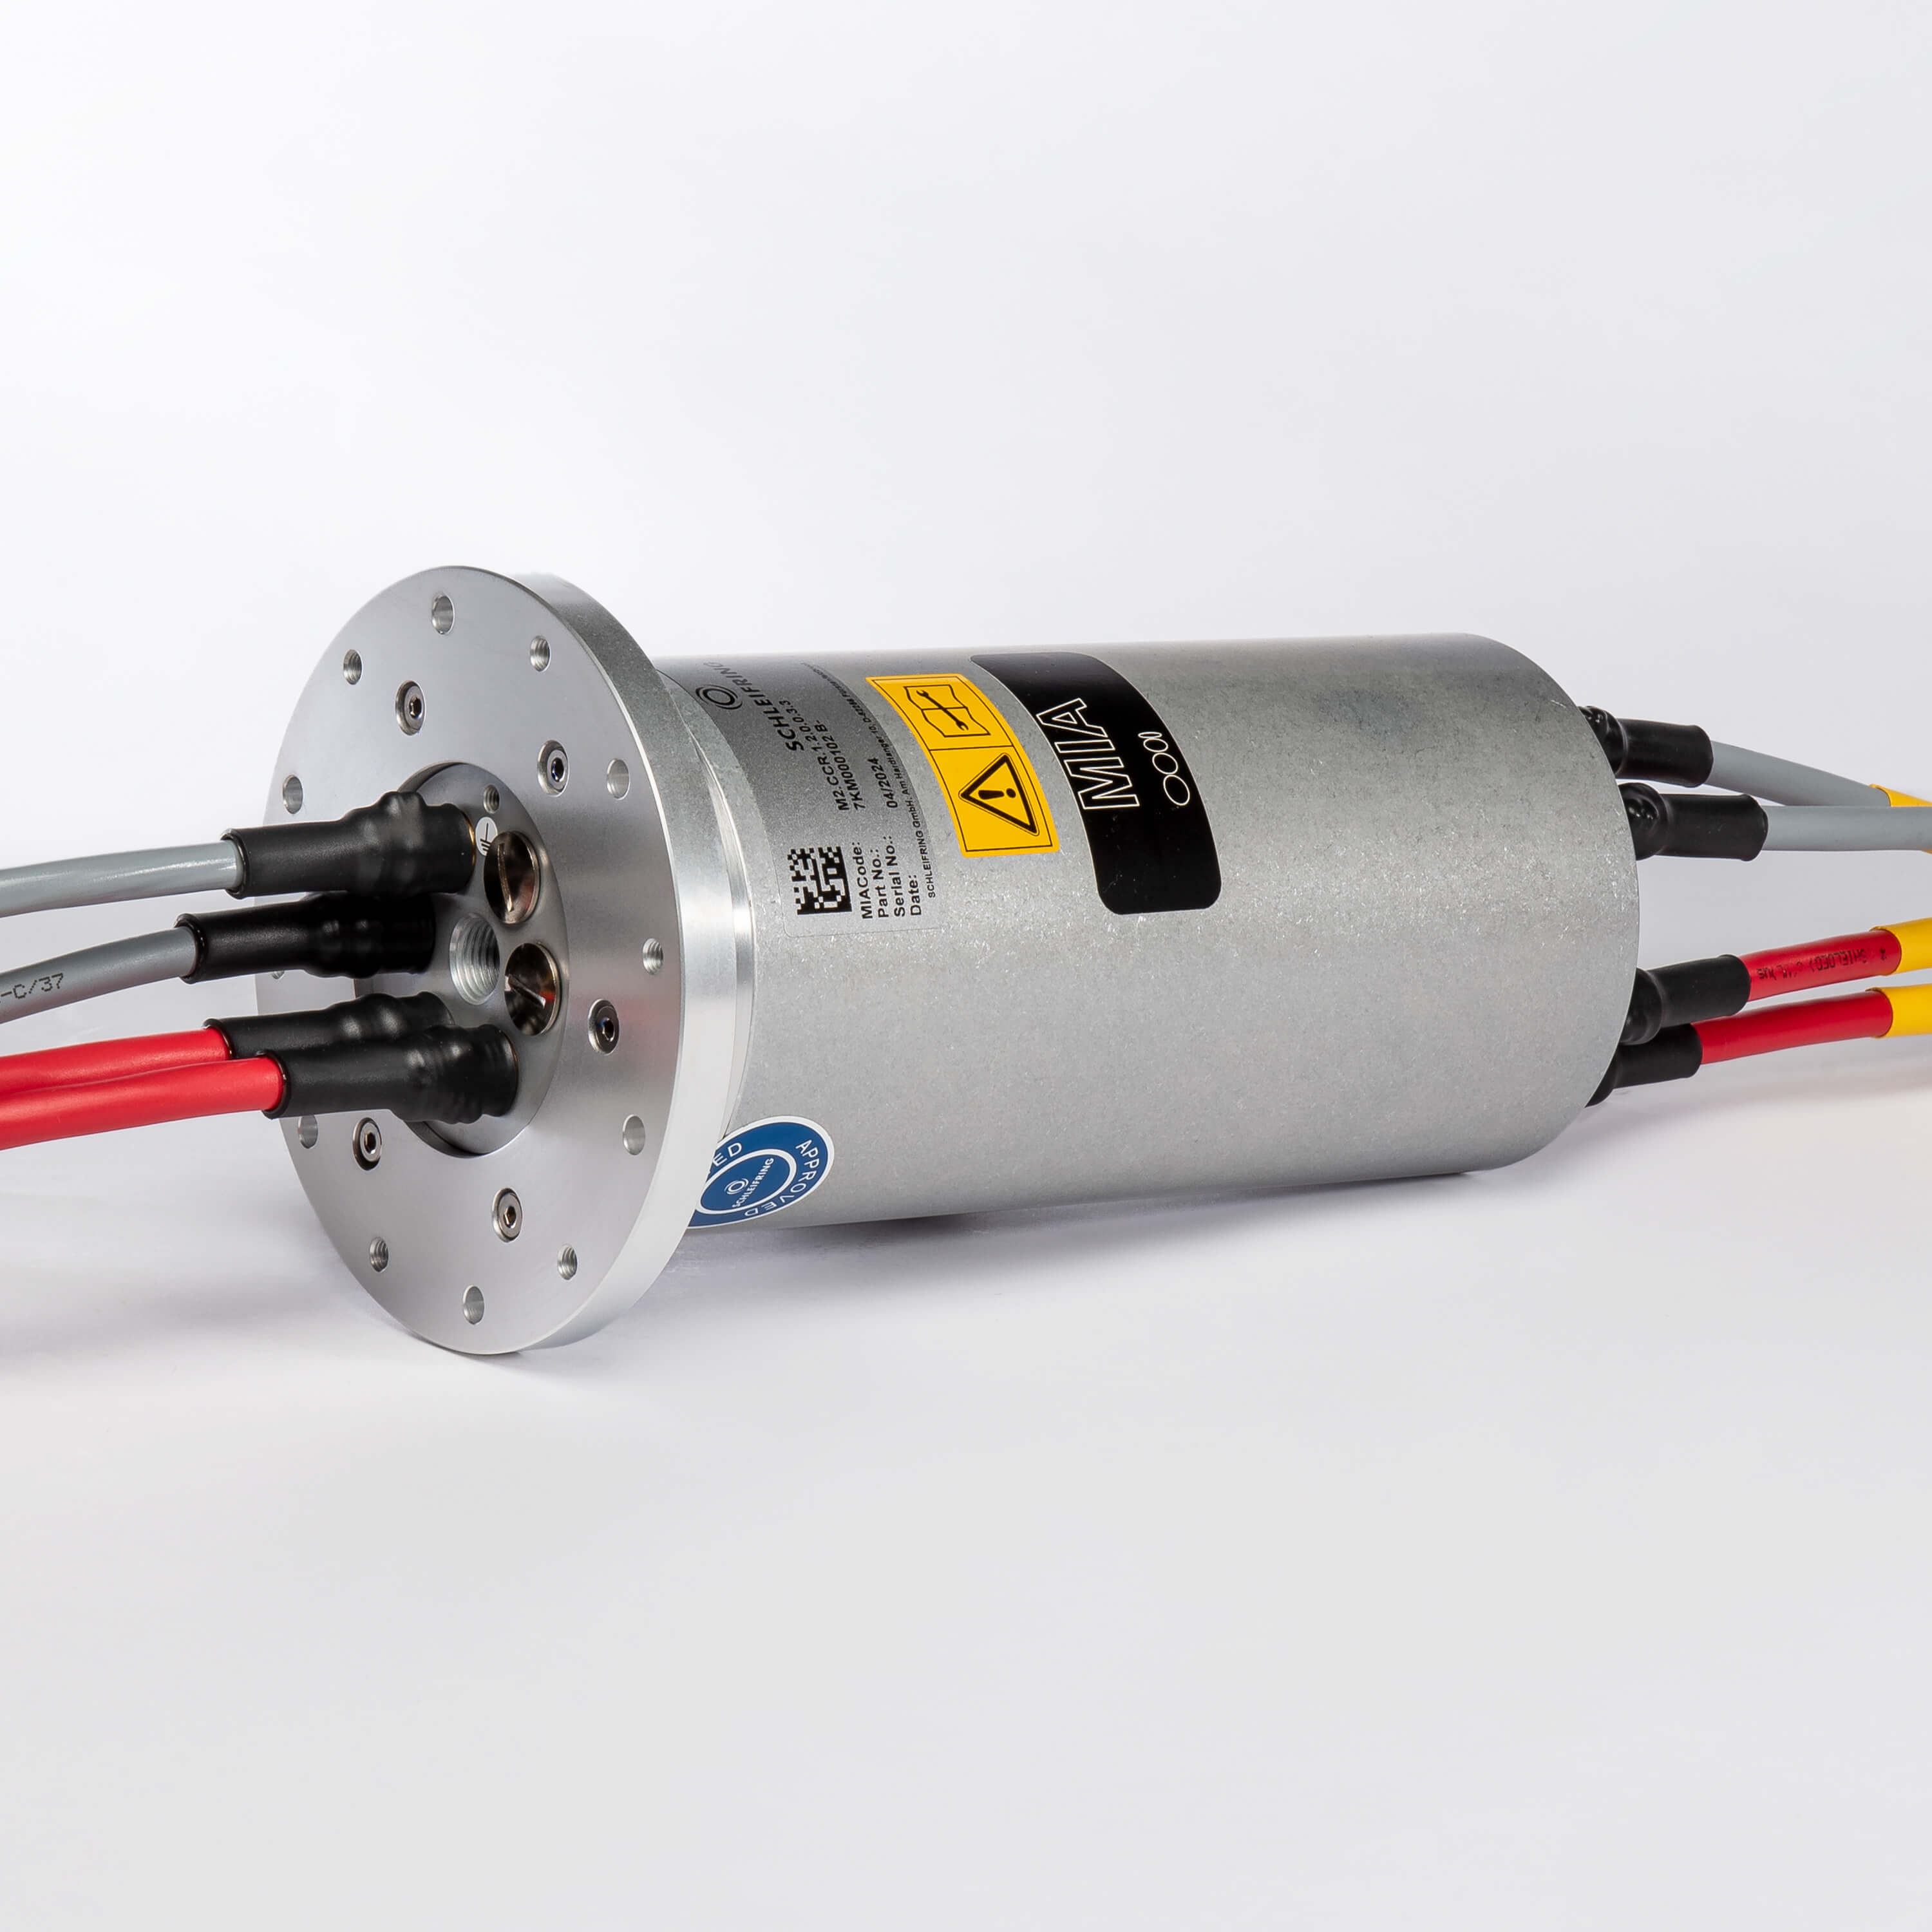 Power slip ring (8-way) and CC-Link transfer (config. Code: M2.CCR.1.2.0.0.3.3)